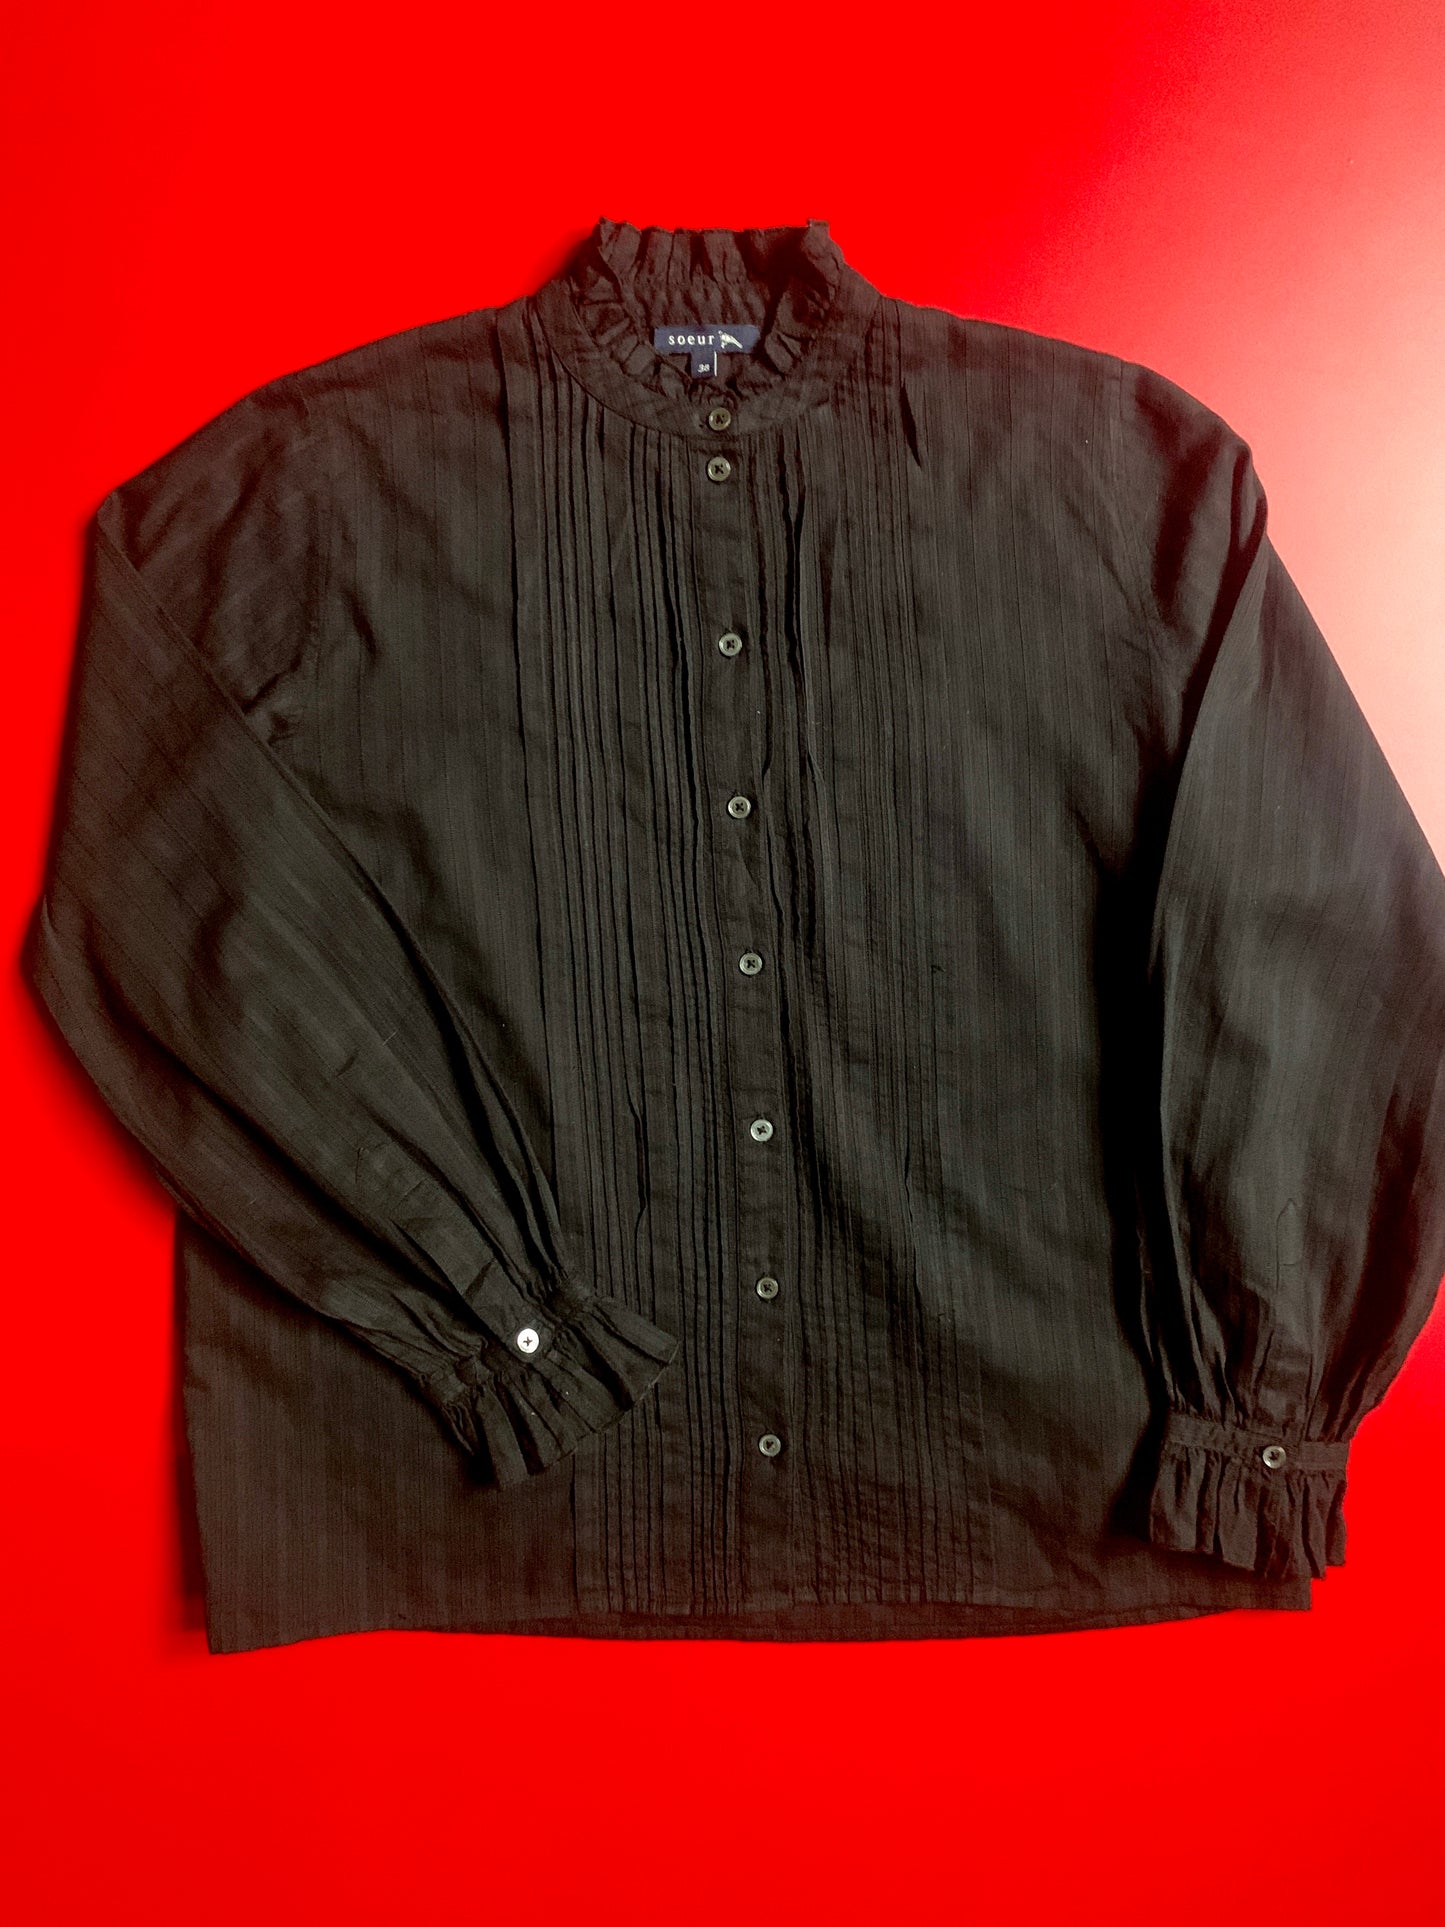 Soeur Pleat Fronted High Collared Shirt.